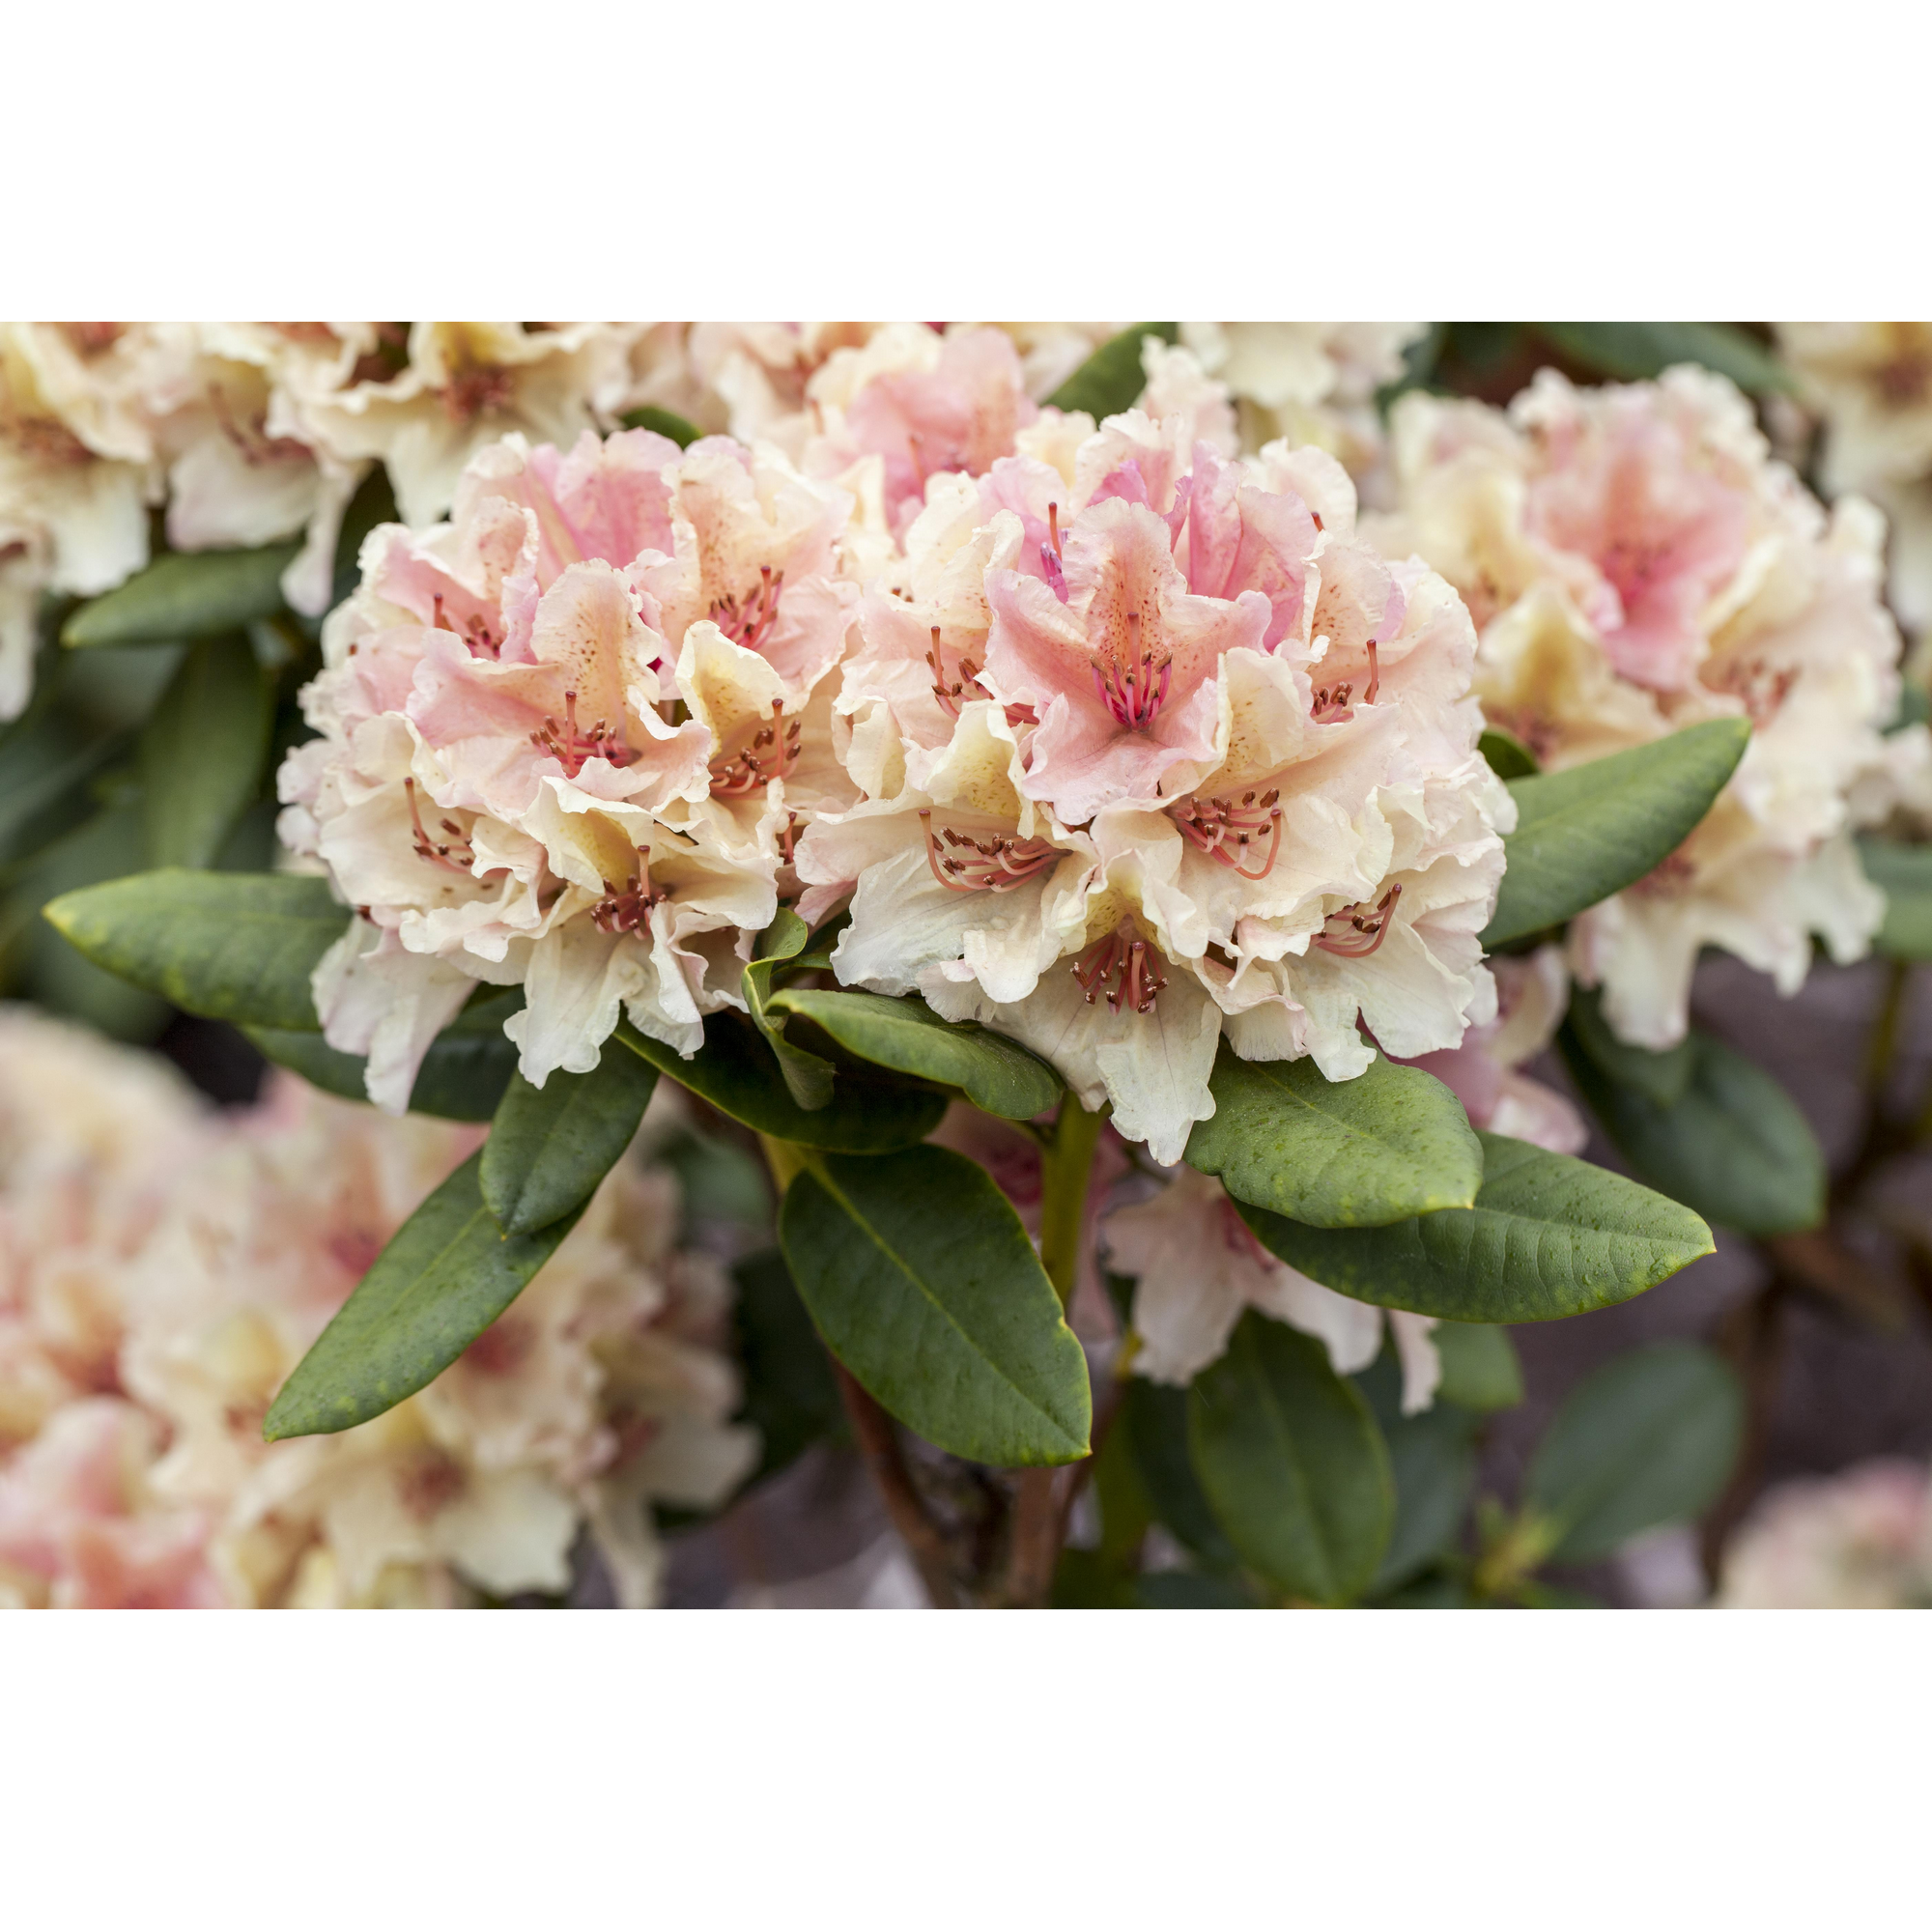 Yakushima-Rhododendron 'Percy Wiseman', 26 cm Topf + product picture